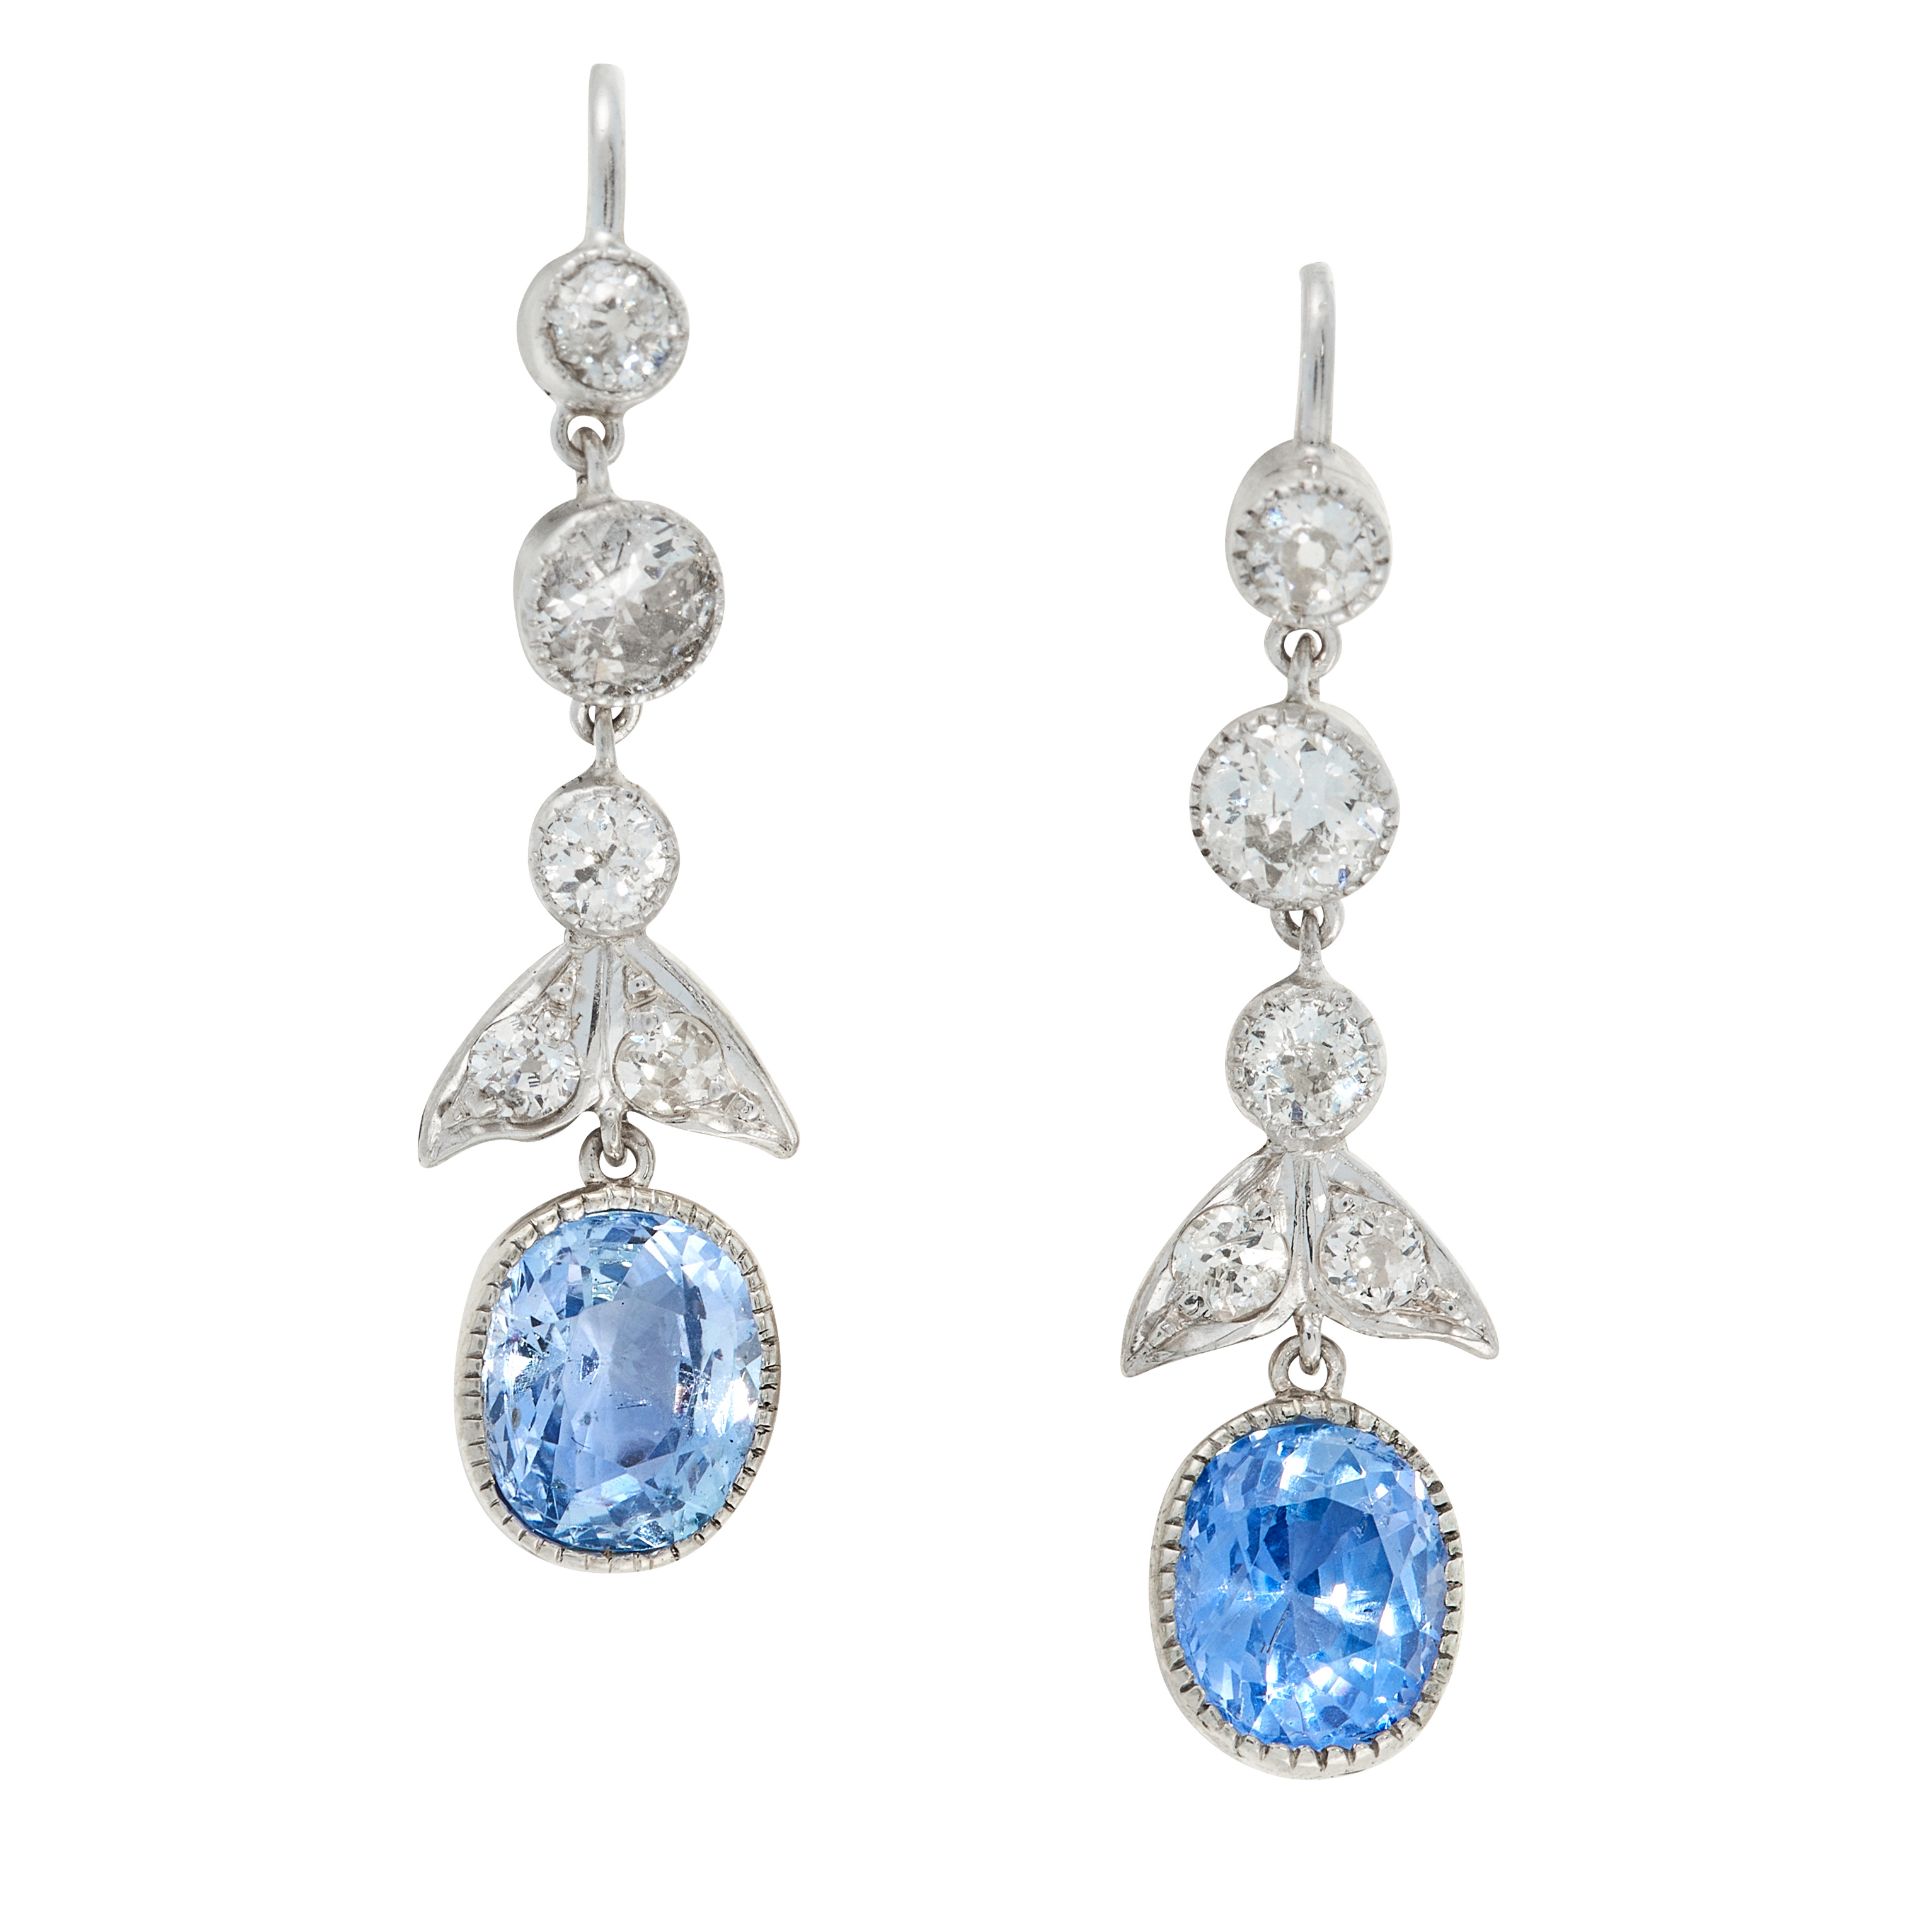 A PAIR OF SAPPHIRE AND DIAMOND EARRINGS, EARLY 20TH CENTURY each set with a cushion cut blue